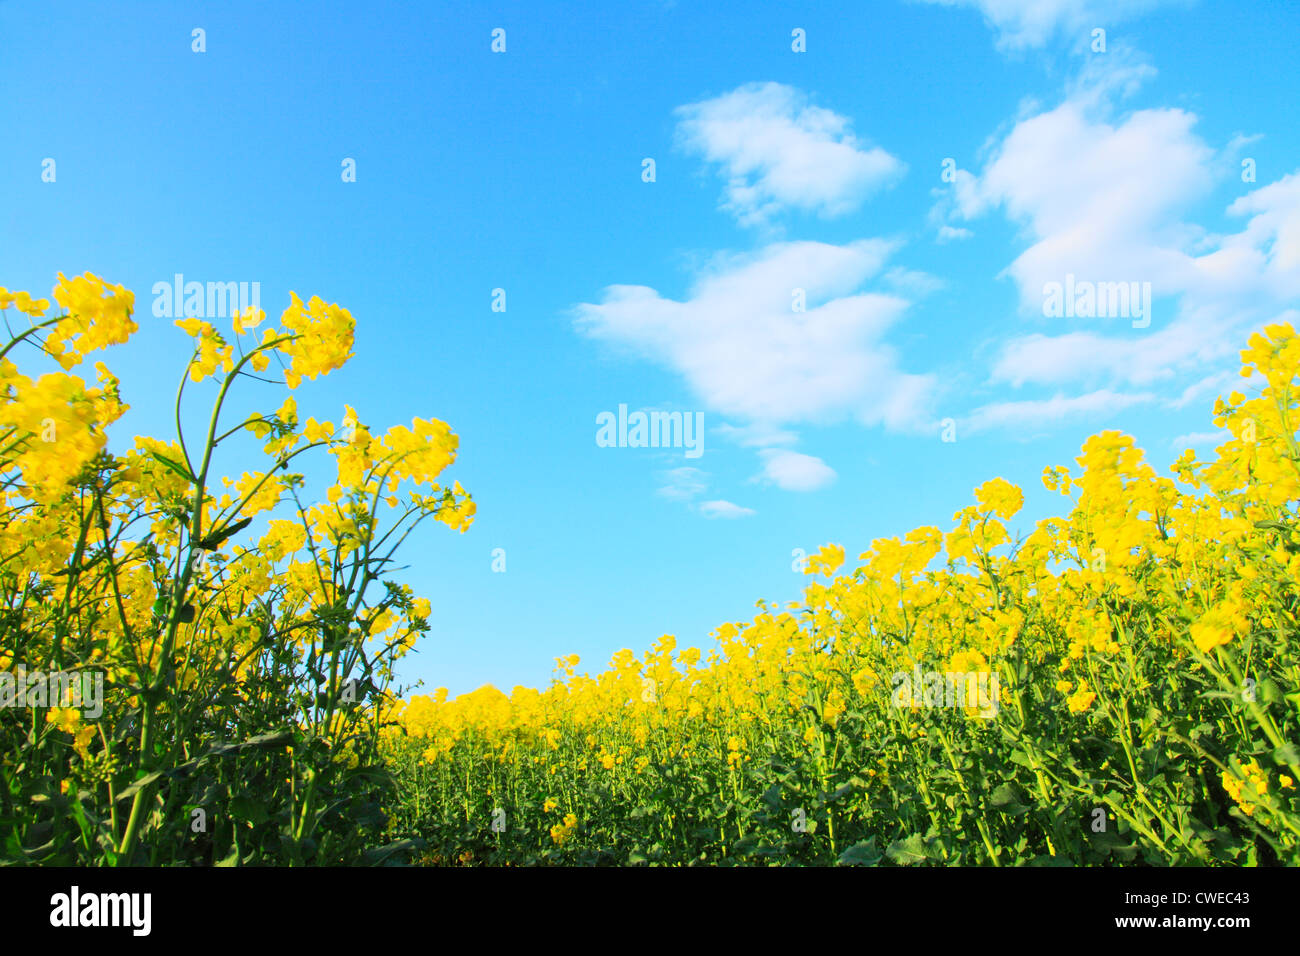 Mustard Field And Blue Sky In Background Stock Photo